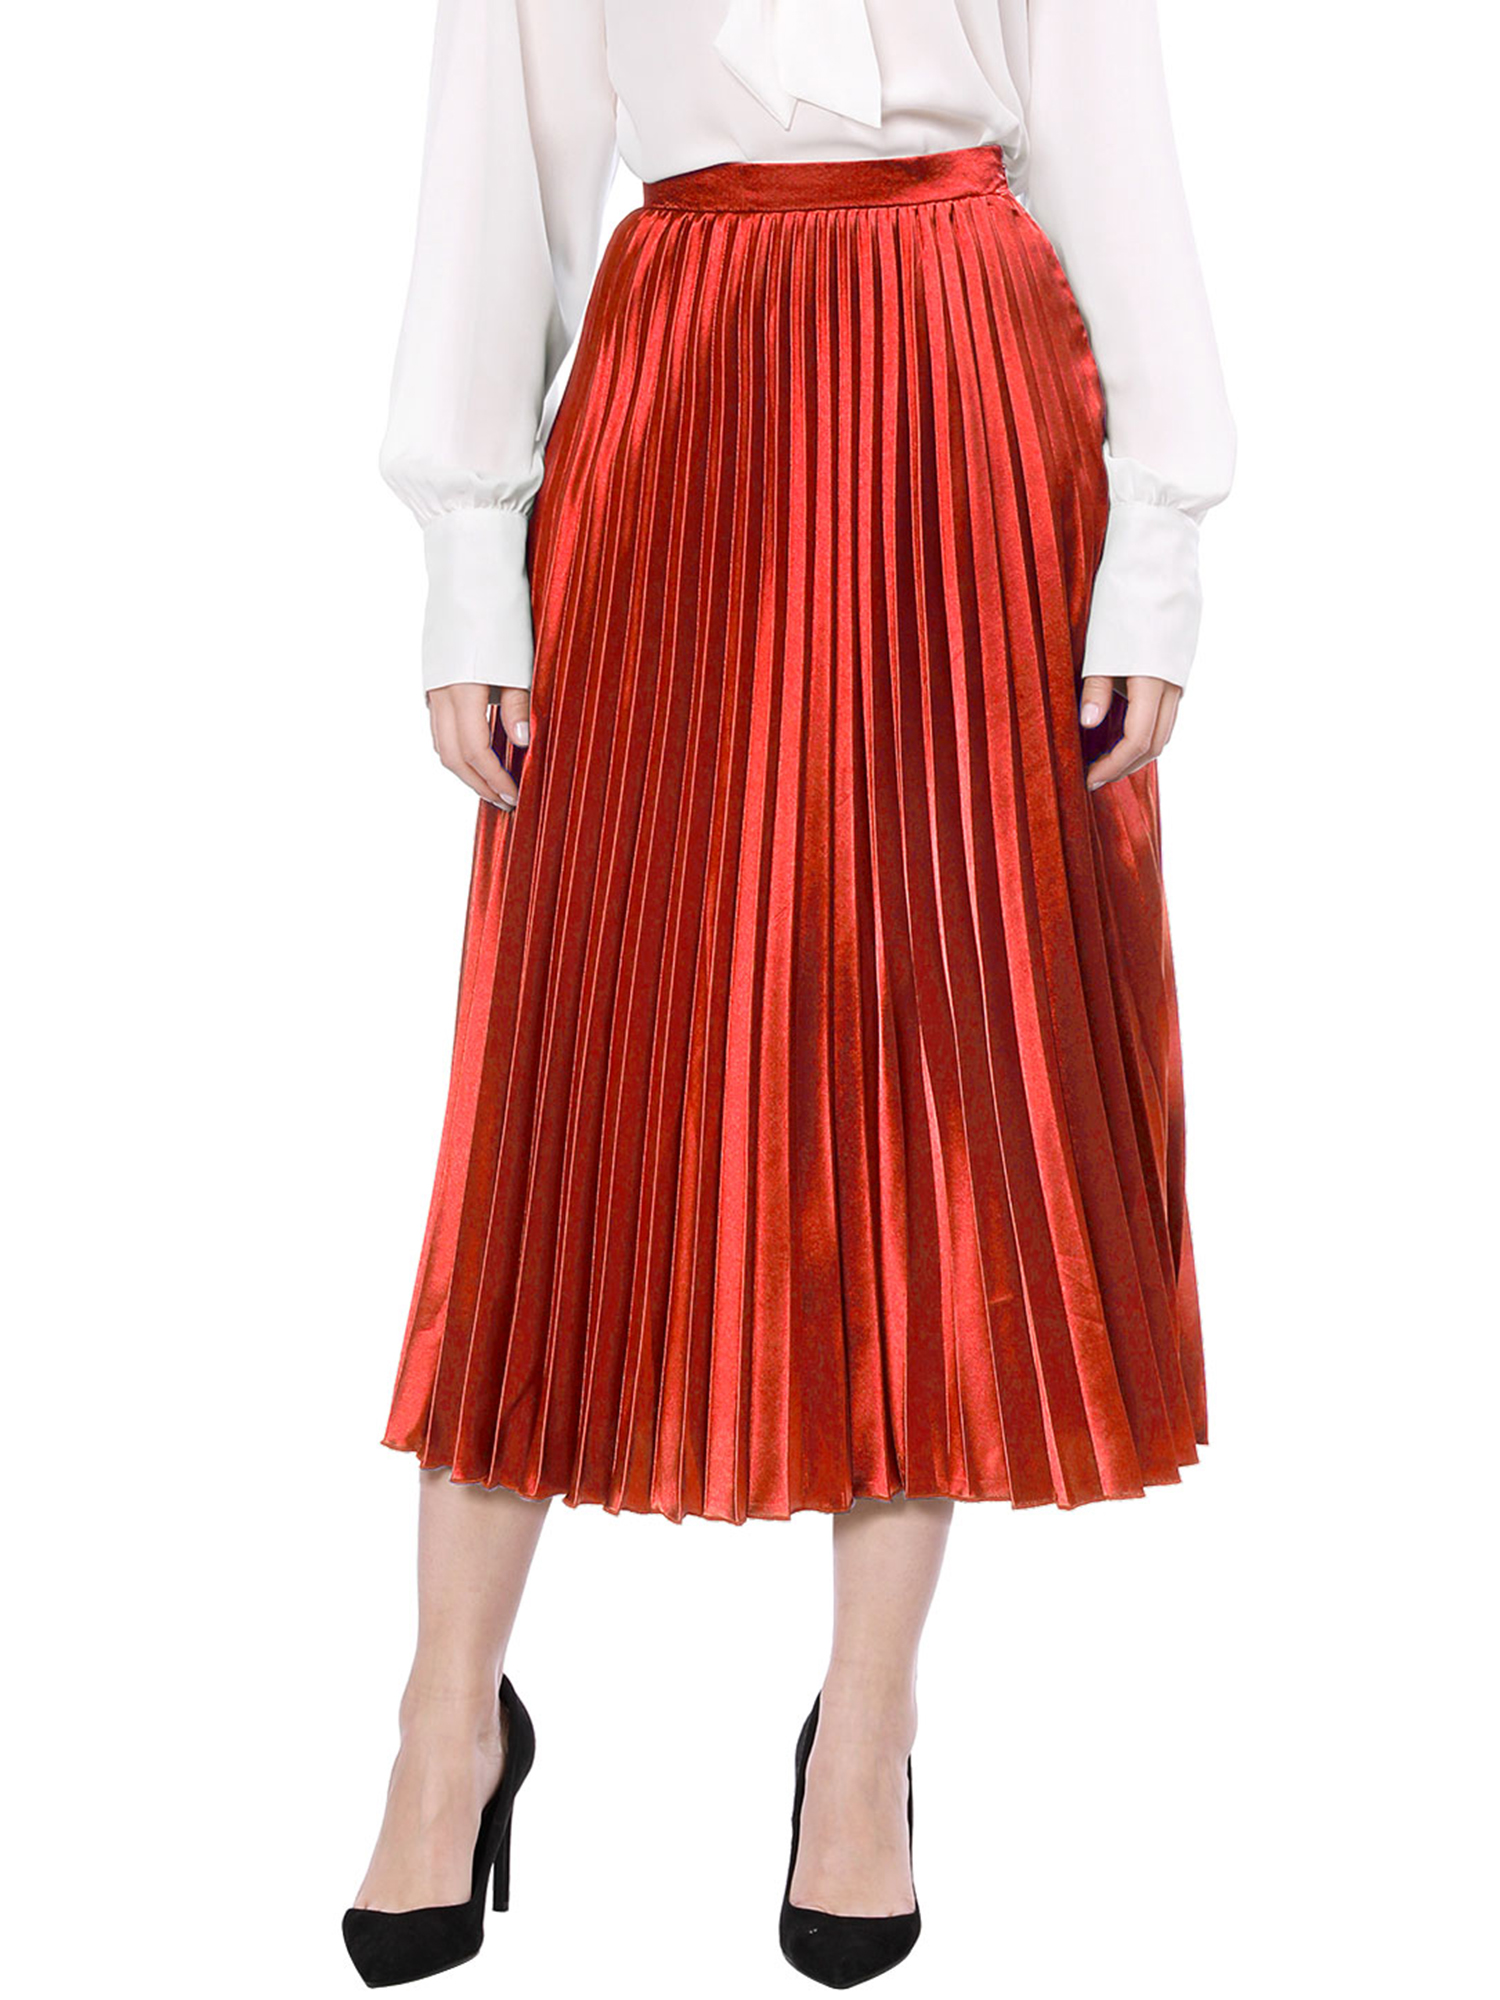 Unique Bargains Women's Halloween Costume A-line High Waist Pleated Midi Skirt L Red - image 1 of 8